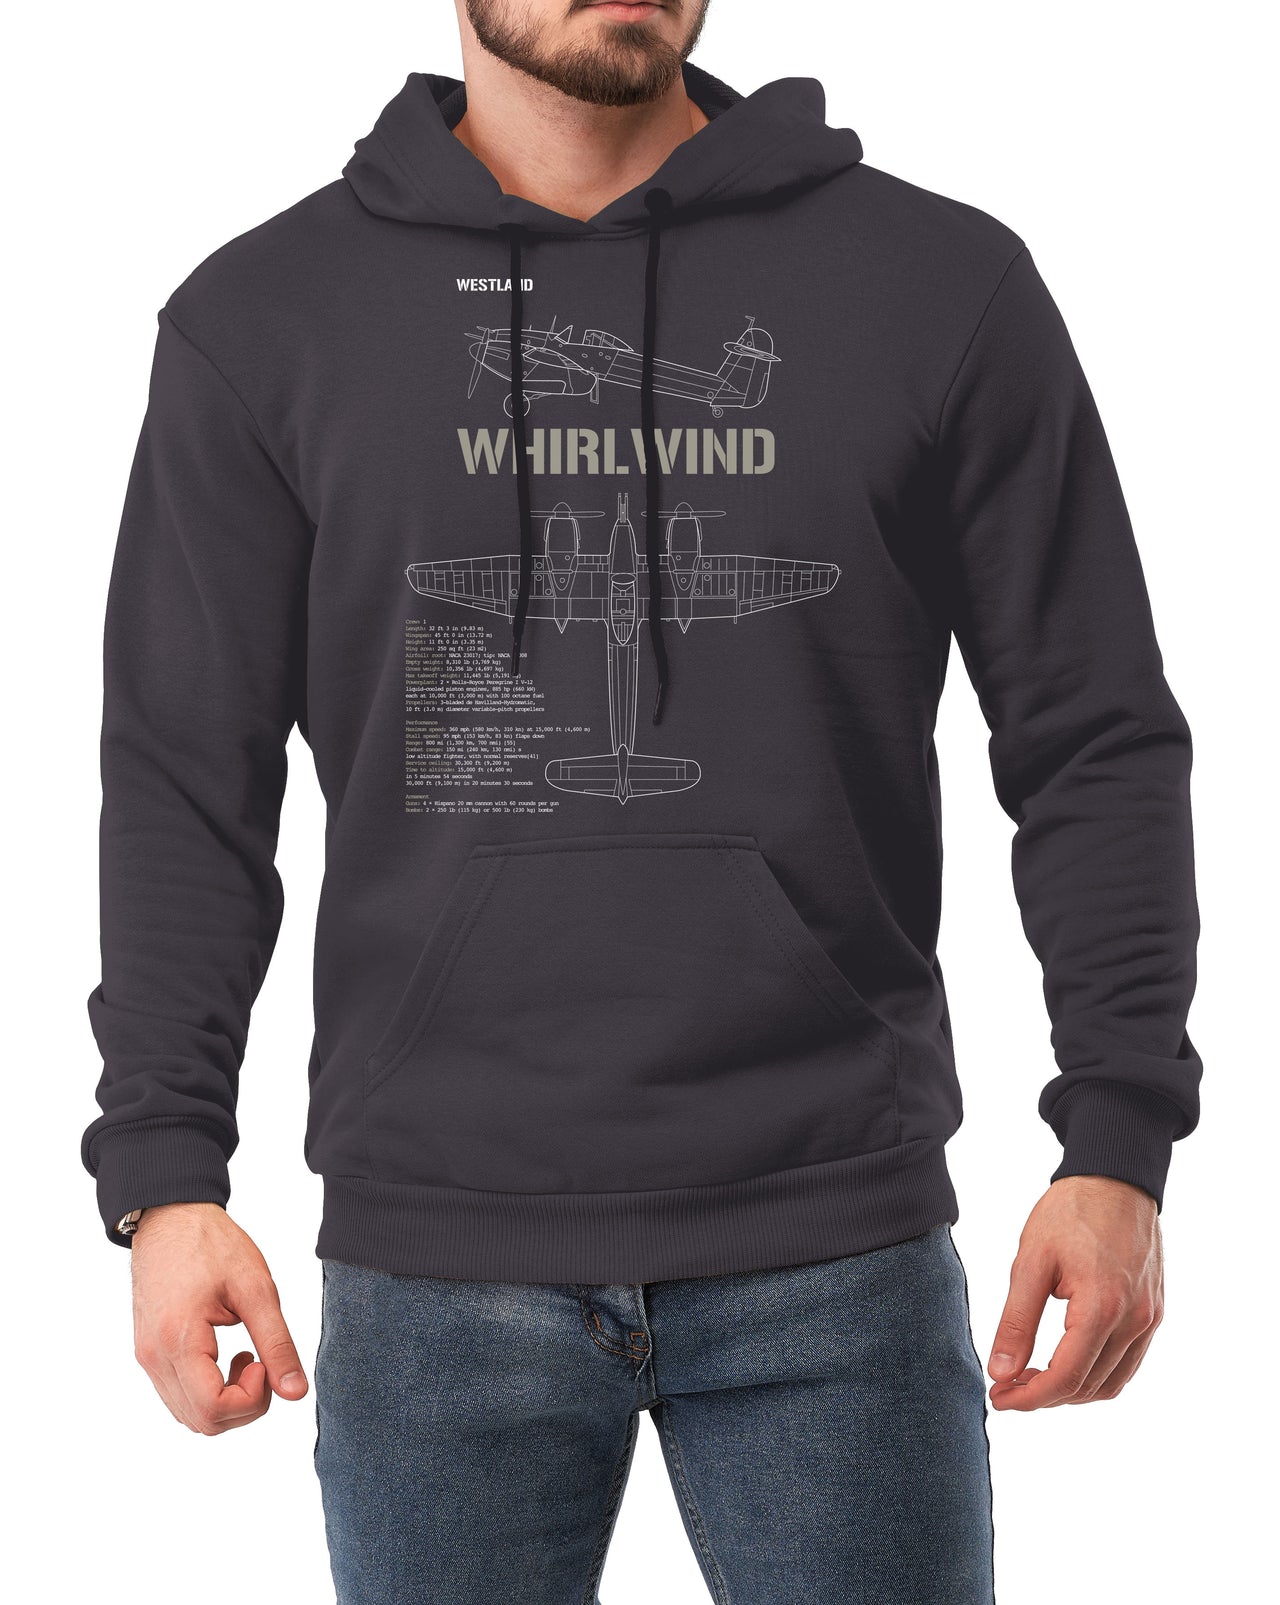 Whirlwind Fighter - Hoodie